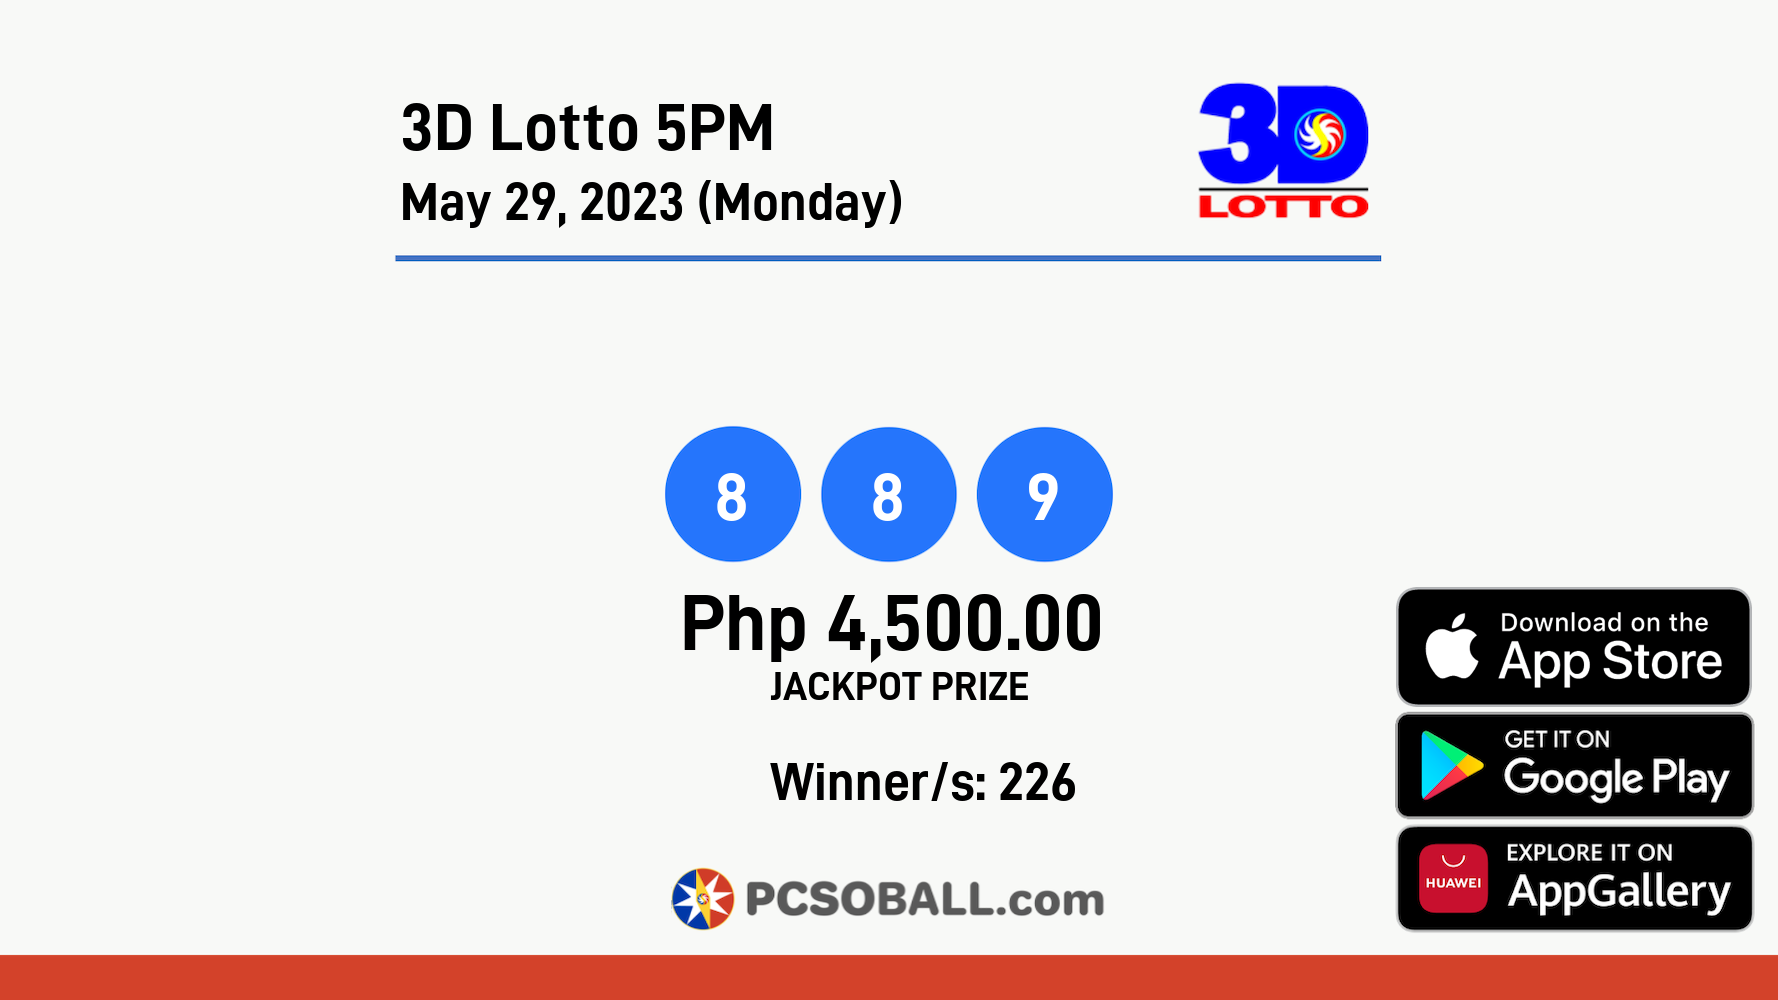 3D Lotto 5PM May 29, 2023 (Monday) Result